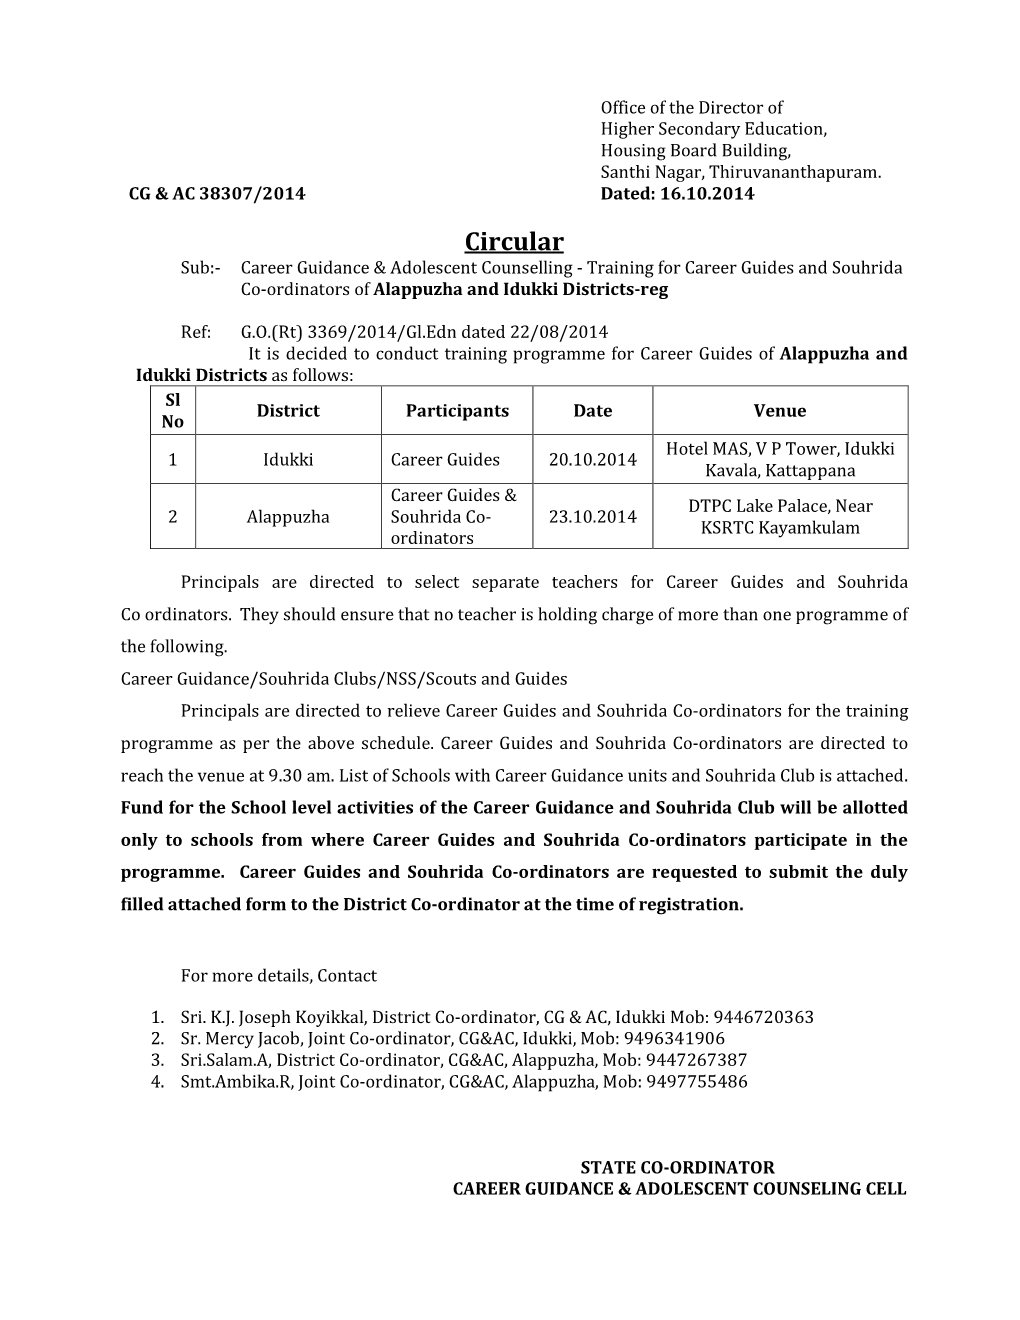 Circular Sub:- Career Guidance & Adolescent Counselling - Training for Career Guides and Souhrida Co-Ordinators of Alappuzha and Idukki Districts-Reg